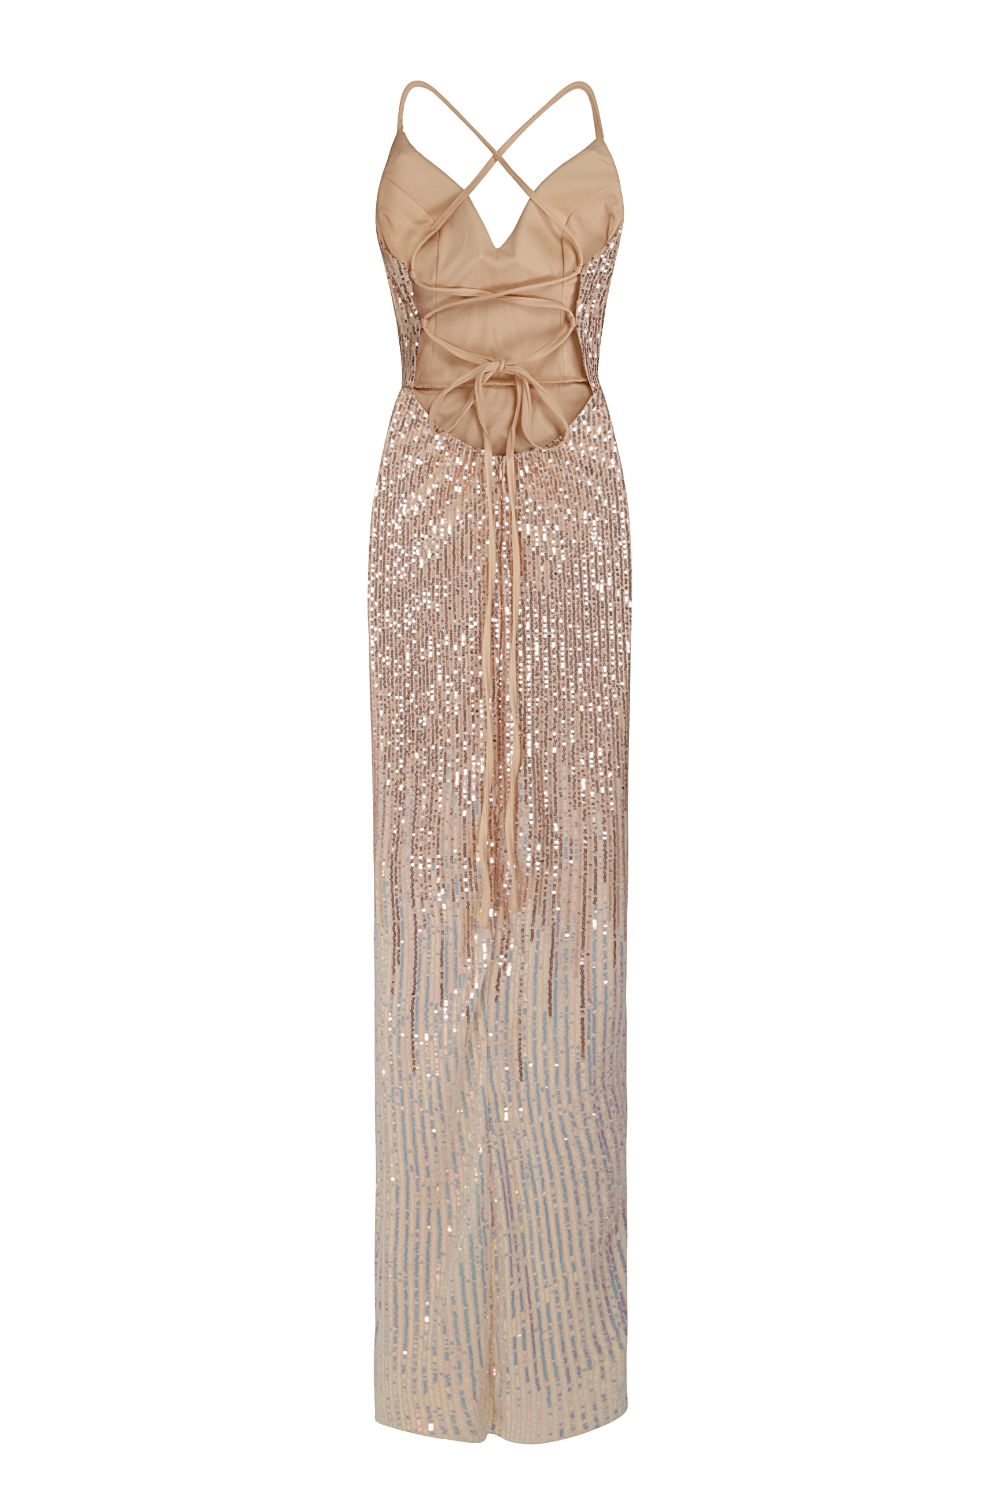 Tiara Rose Gold Silver Ombre Sequin Plunge Thigh Slit Fishtail Dress